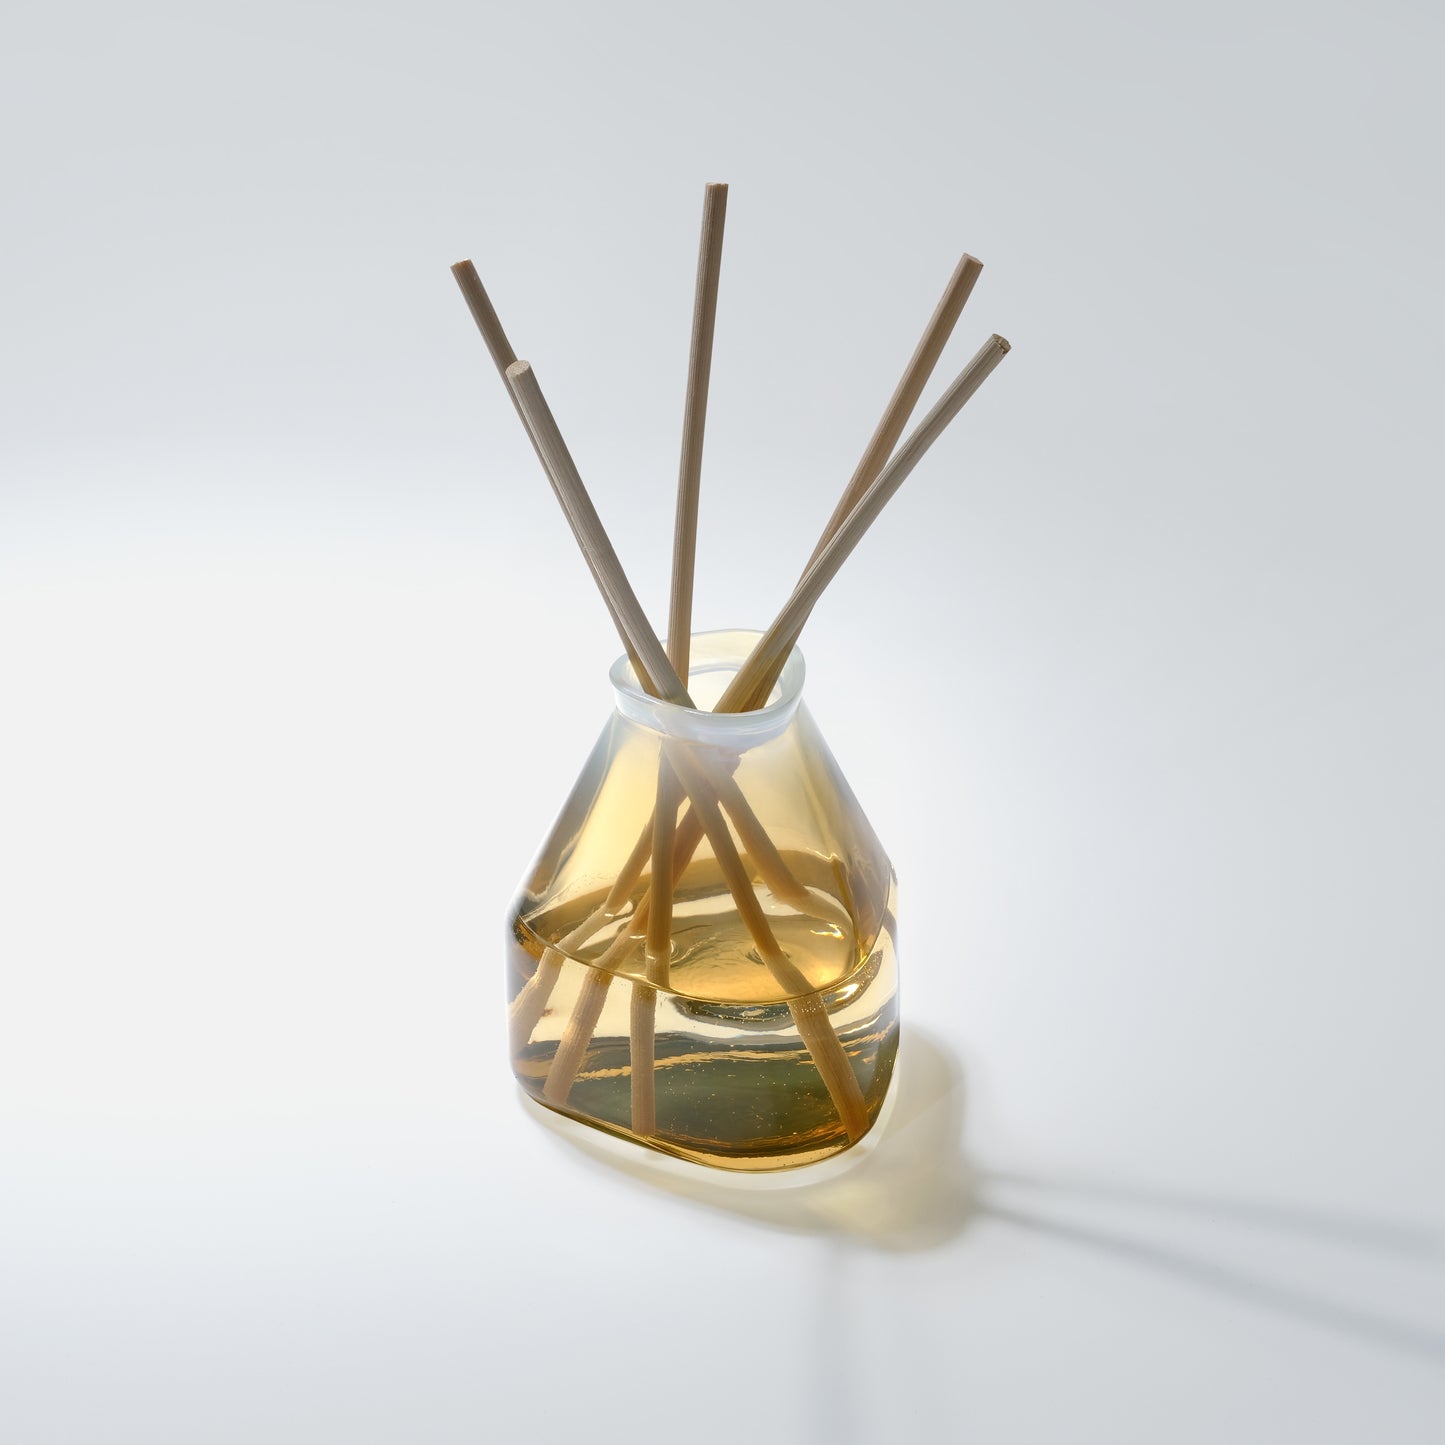 Sound Perfume Reed Diffuser #Swallow Escapism